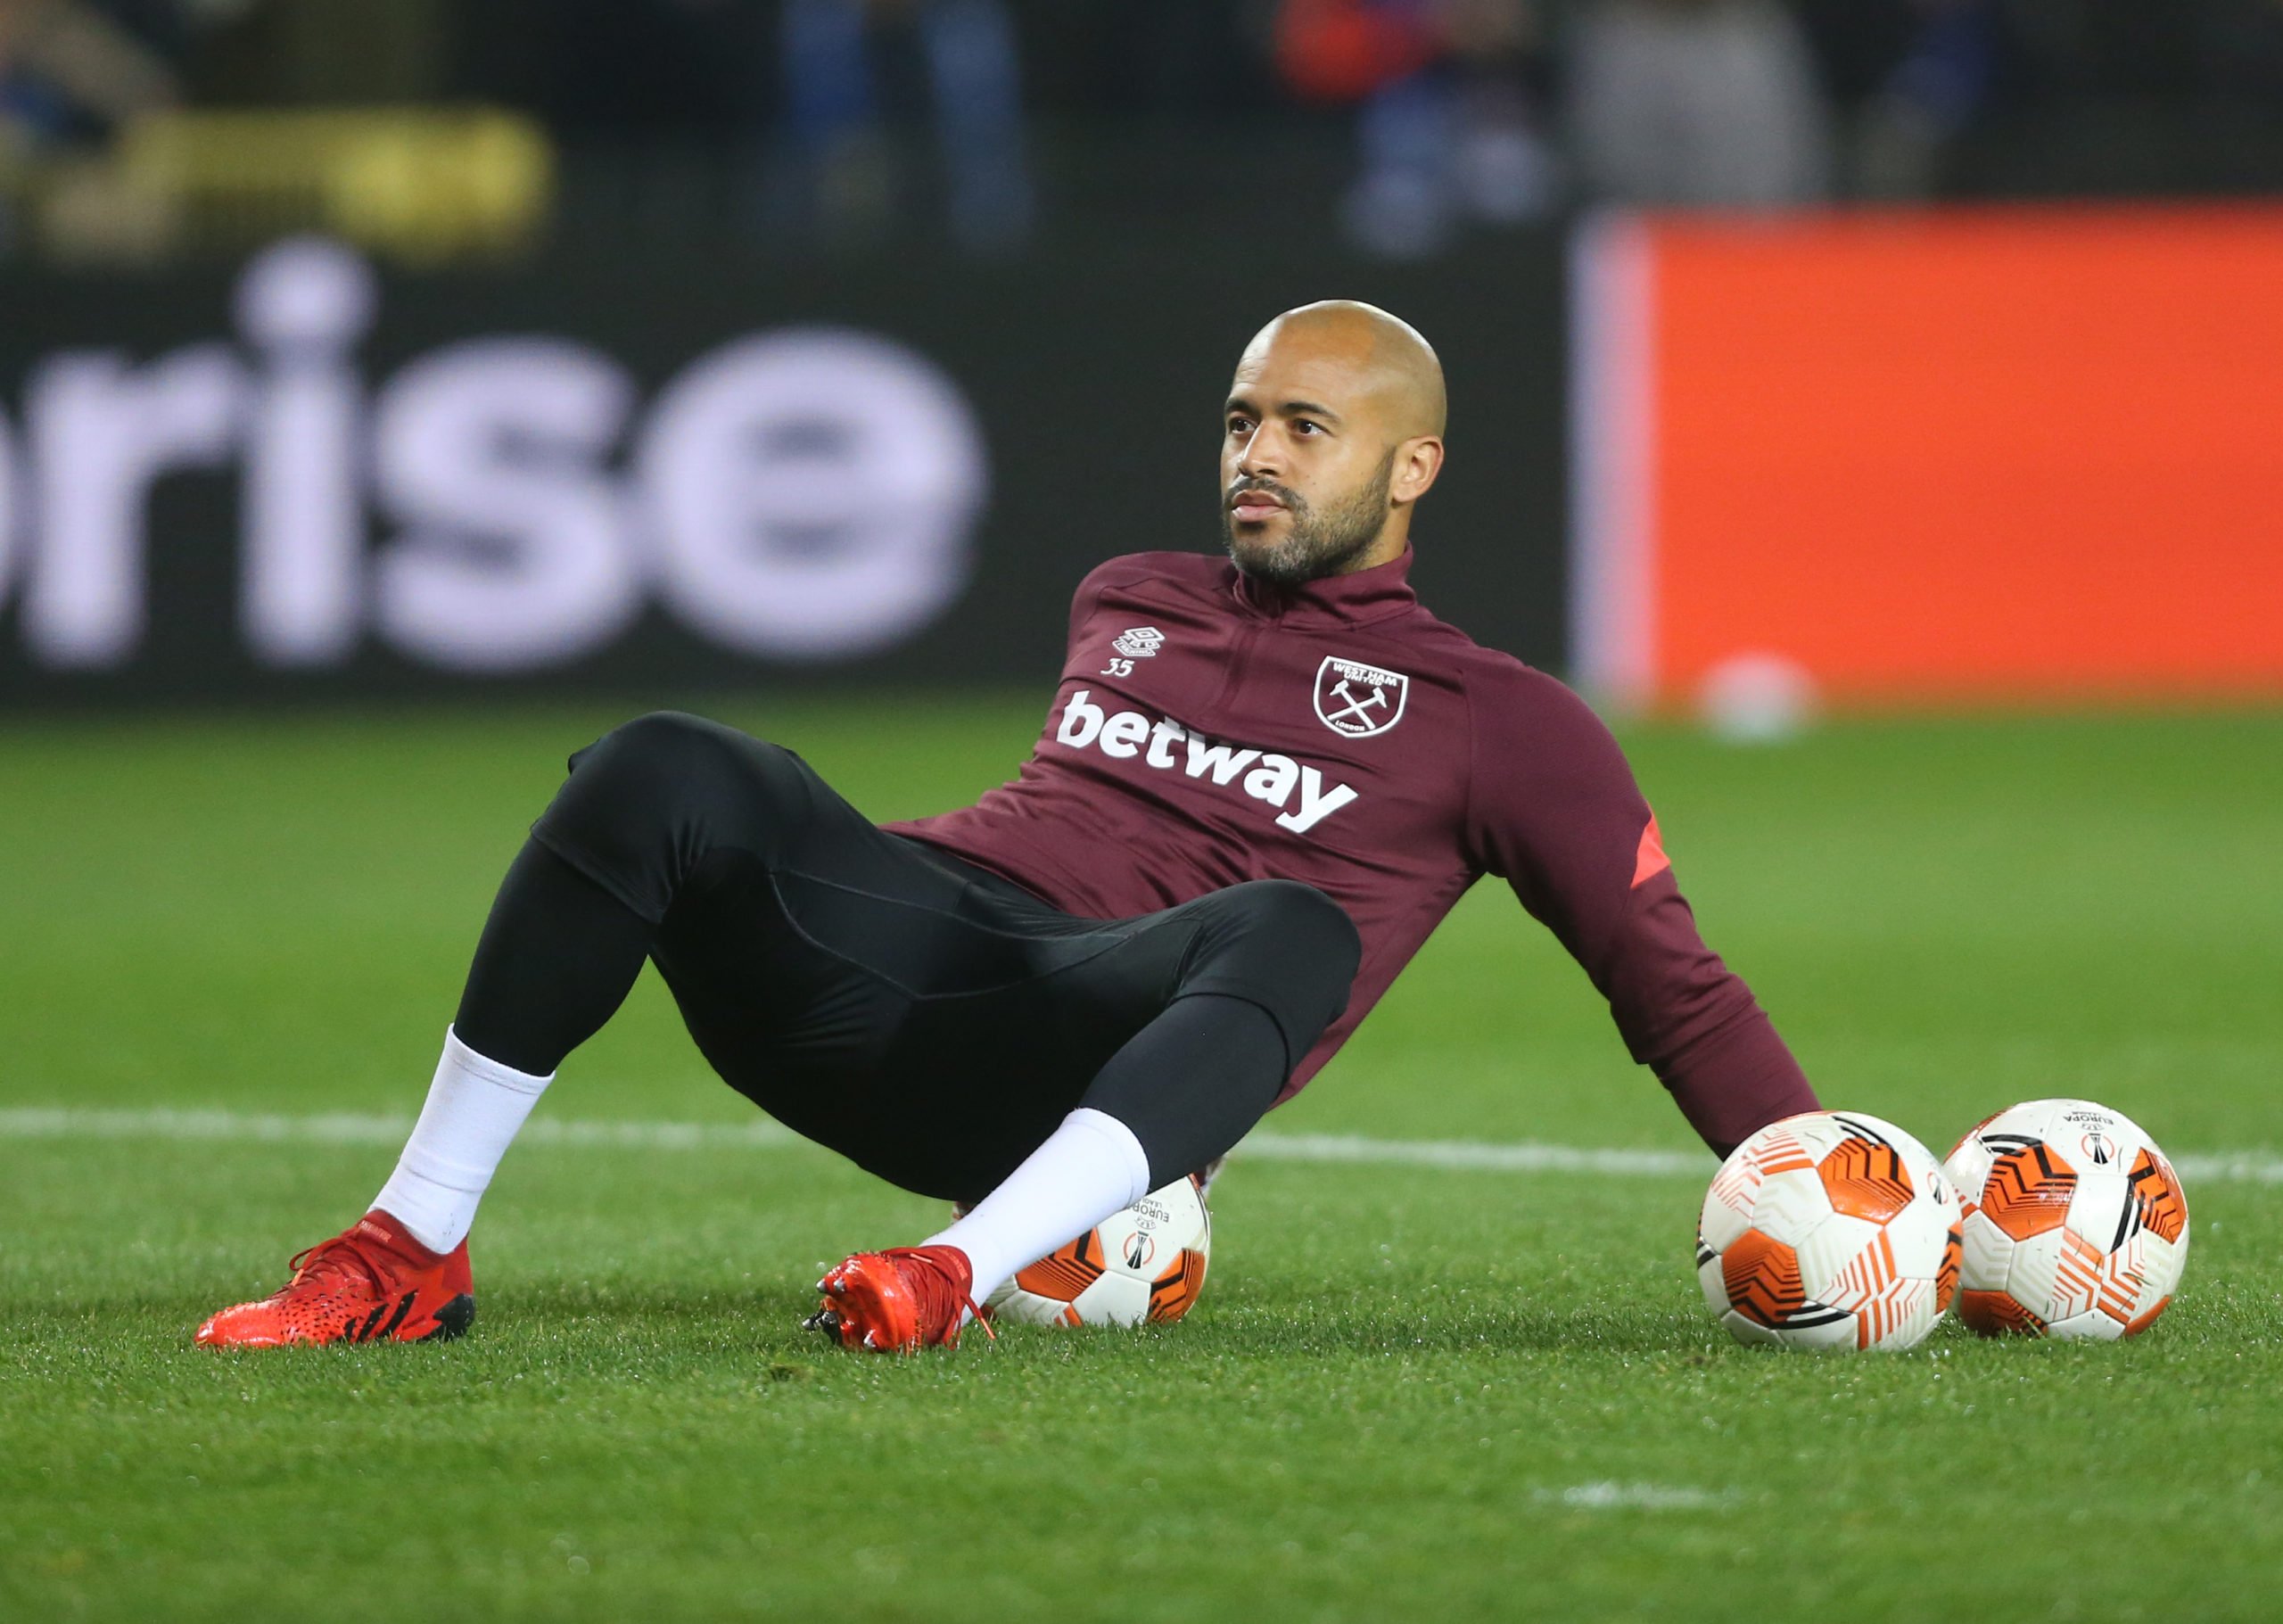 Darren Randolph says West Ham wouldn't let him leave in January